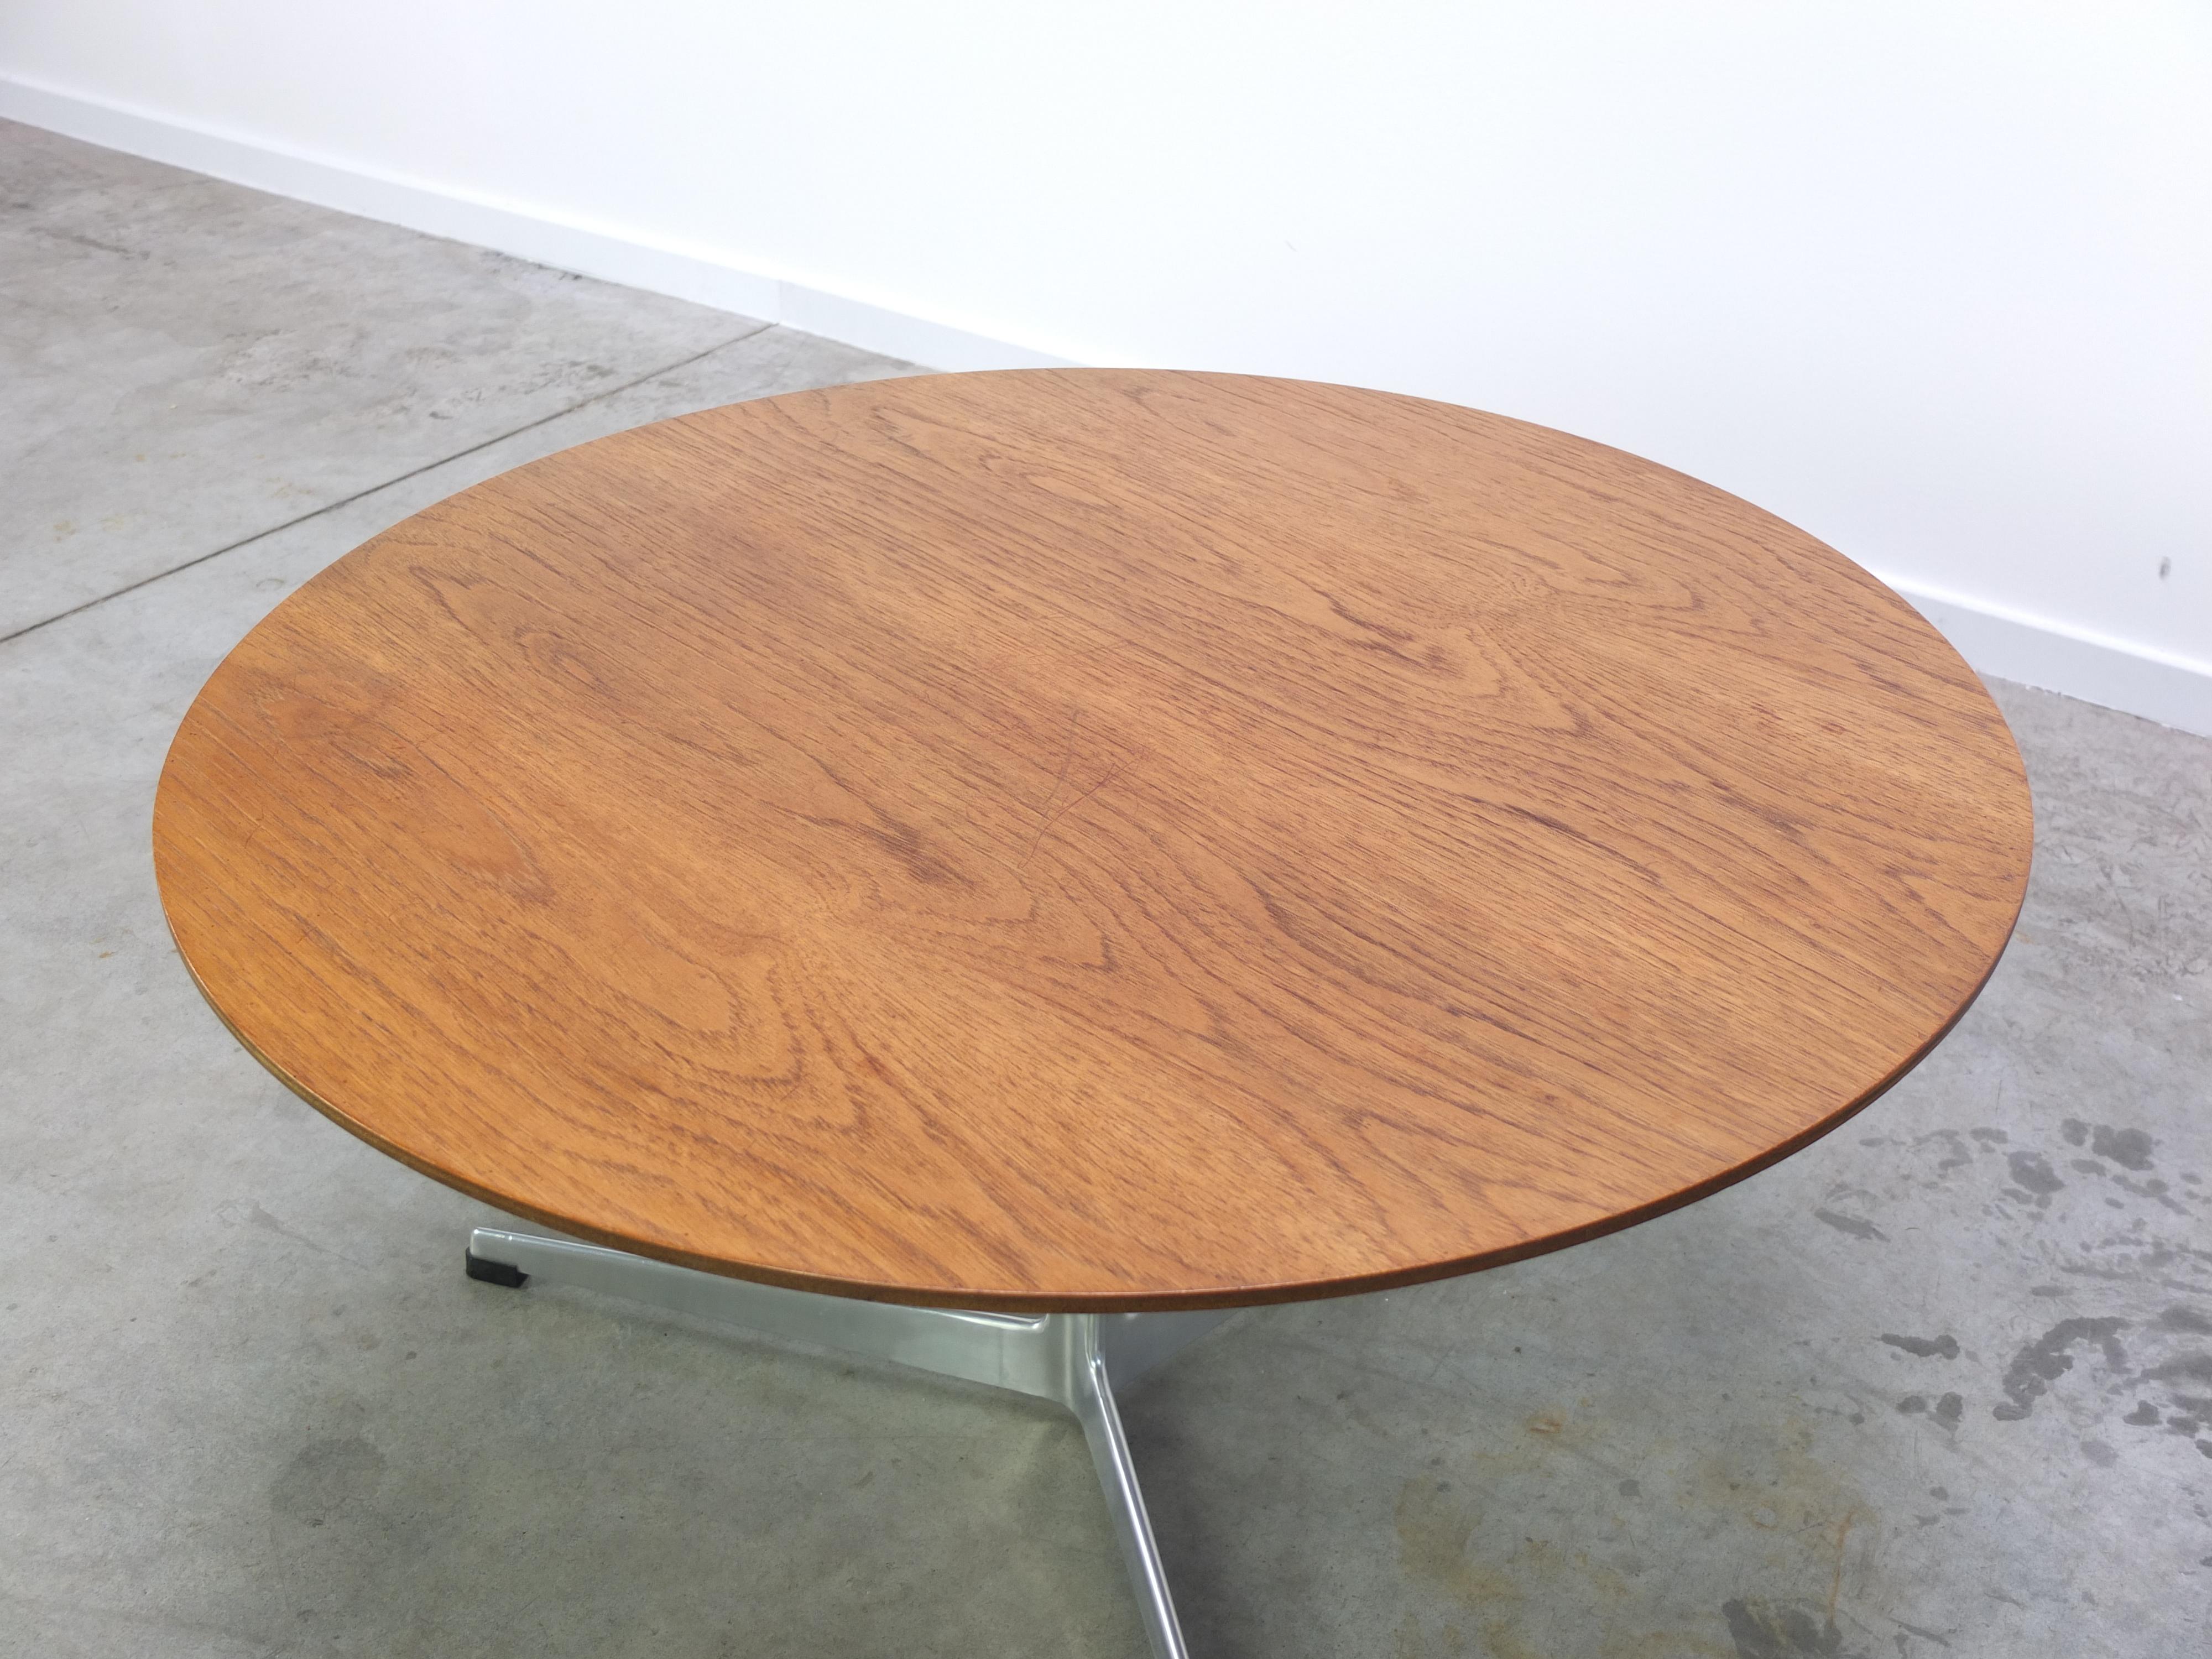 Early Teak Coffee Table by Arne Jacobsen for Fritz Hansen, 1960s For Sale 4